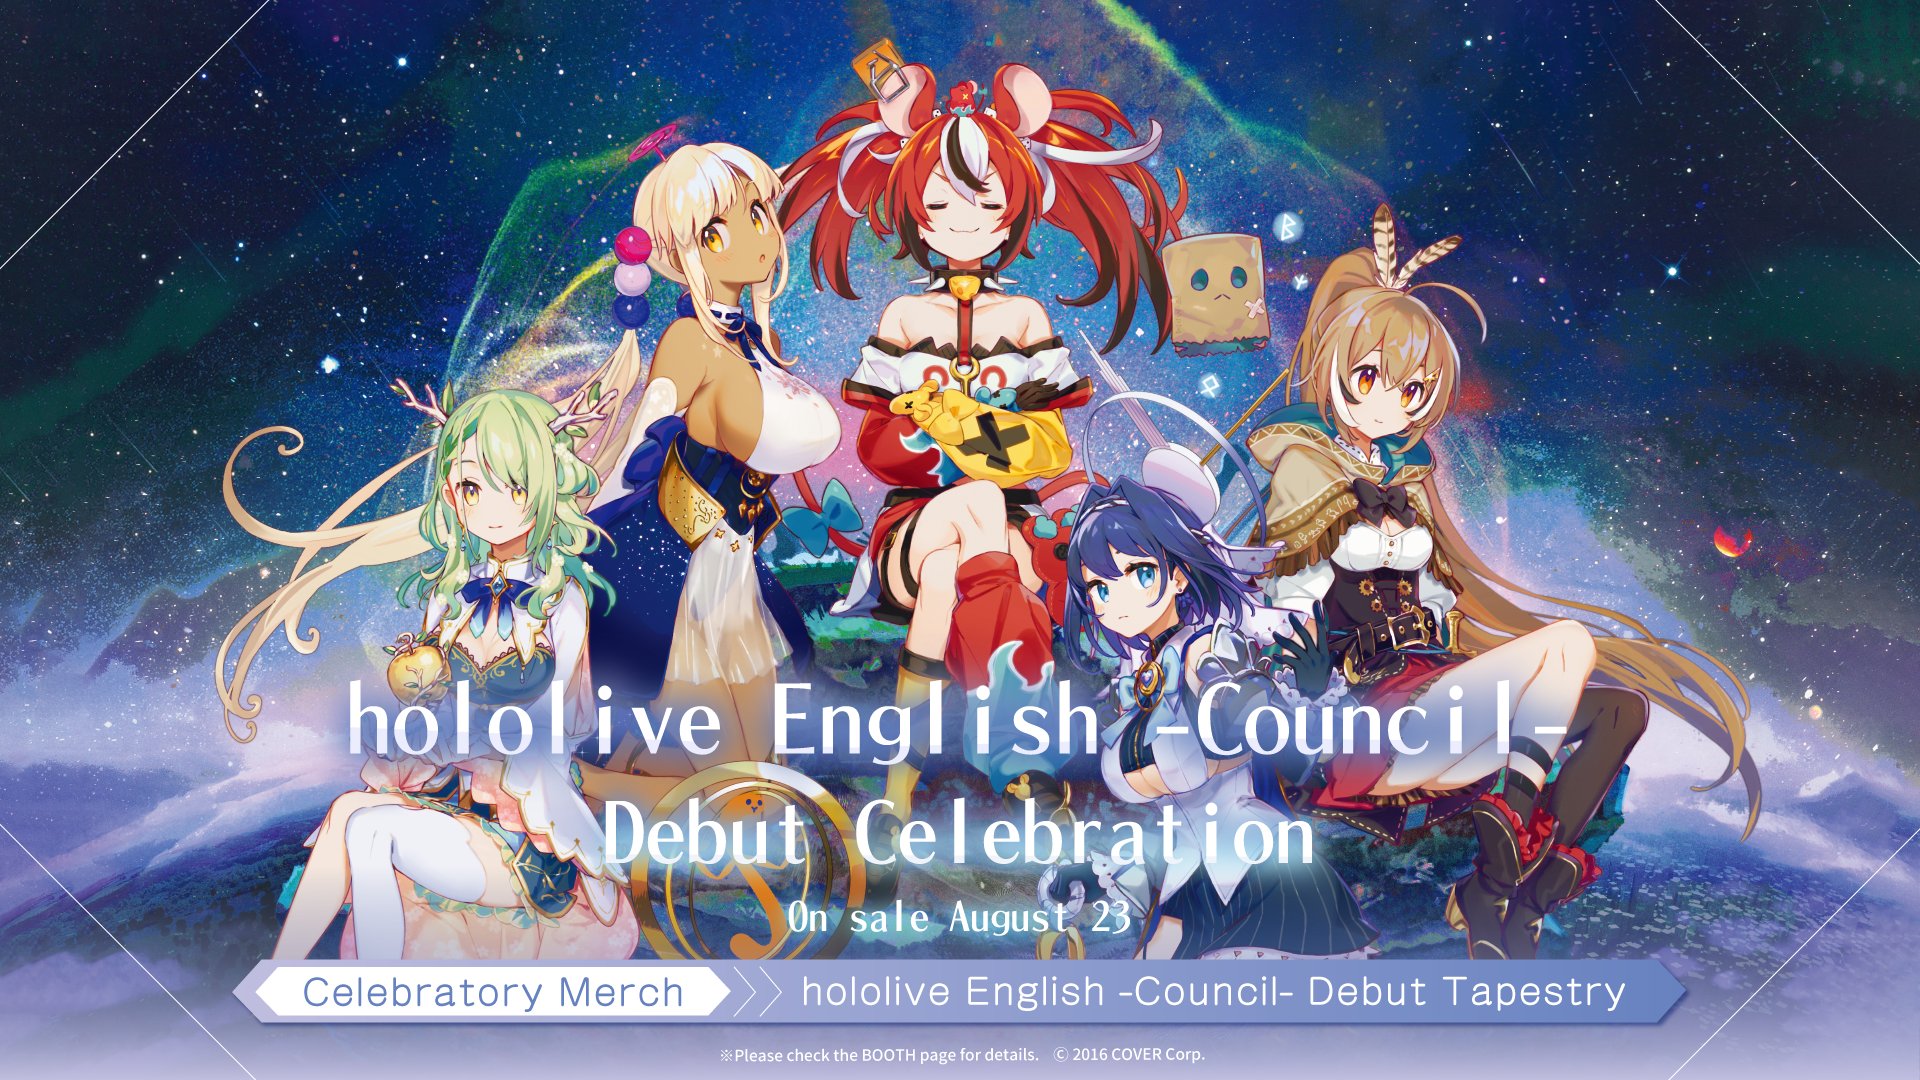 hololive Official - [Merch Info] hololive English -Council- Debut Tapestry is now on sale!